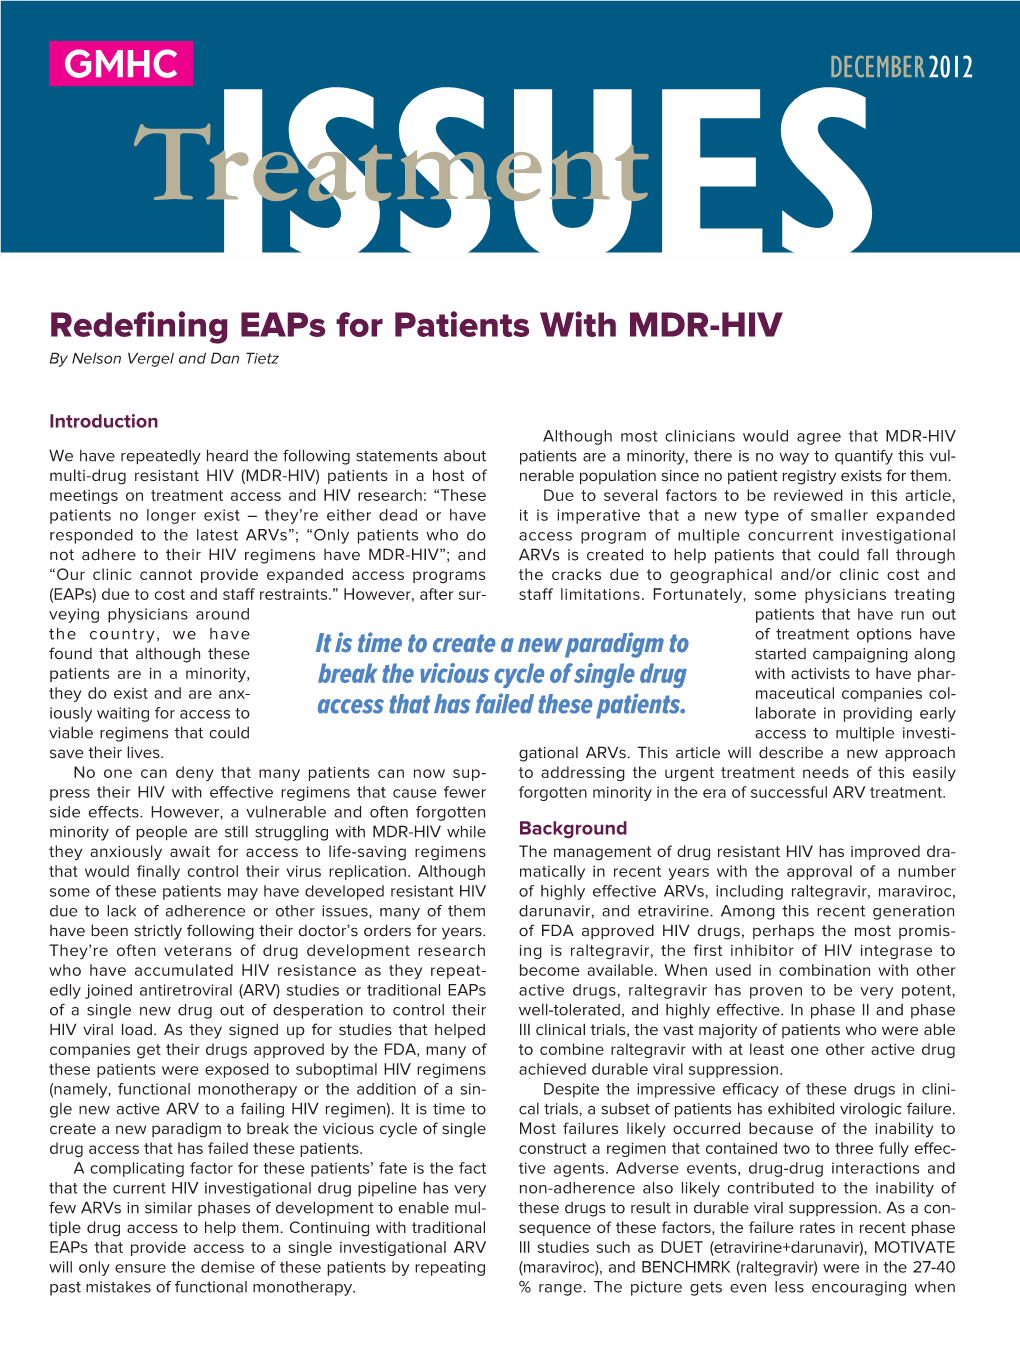 Treatmentissues Redefining Eaps for Patients with MDR-HIV by Nelson Vergel and Dan Tietz